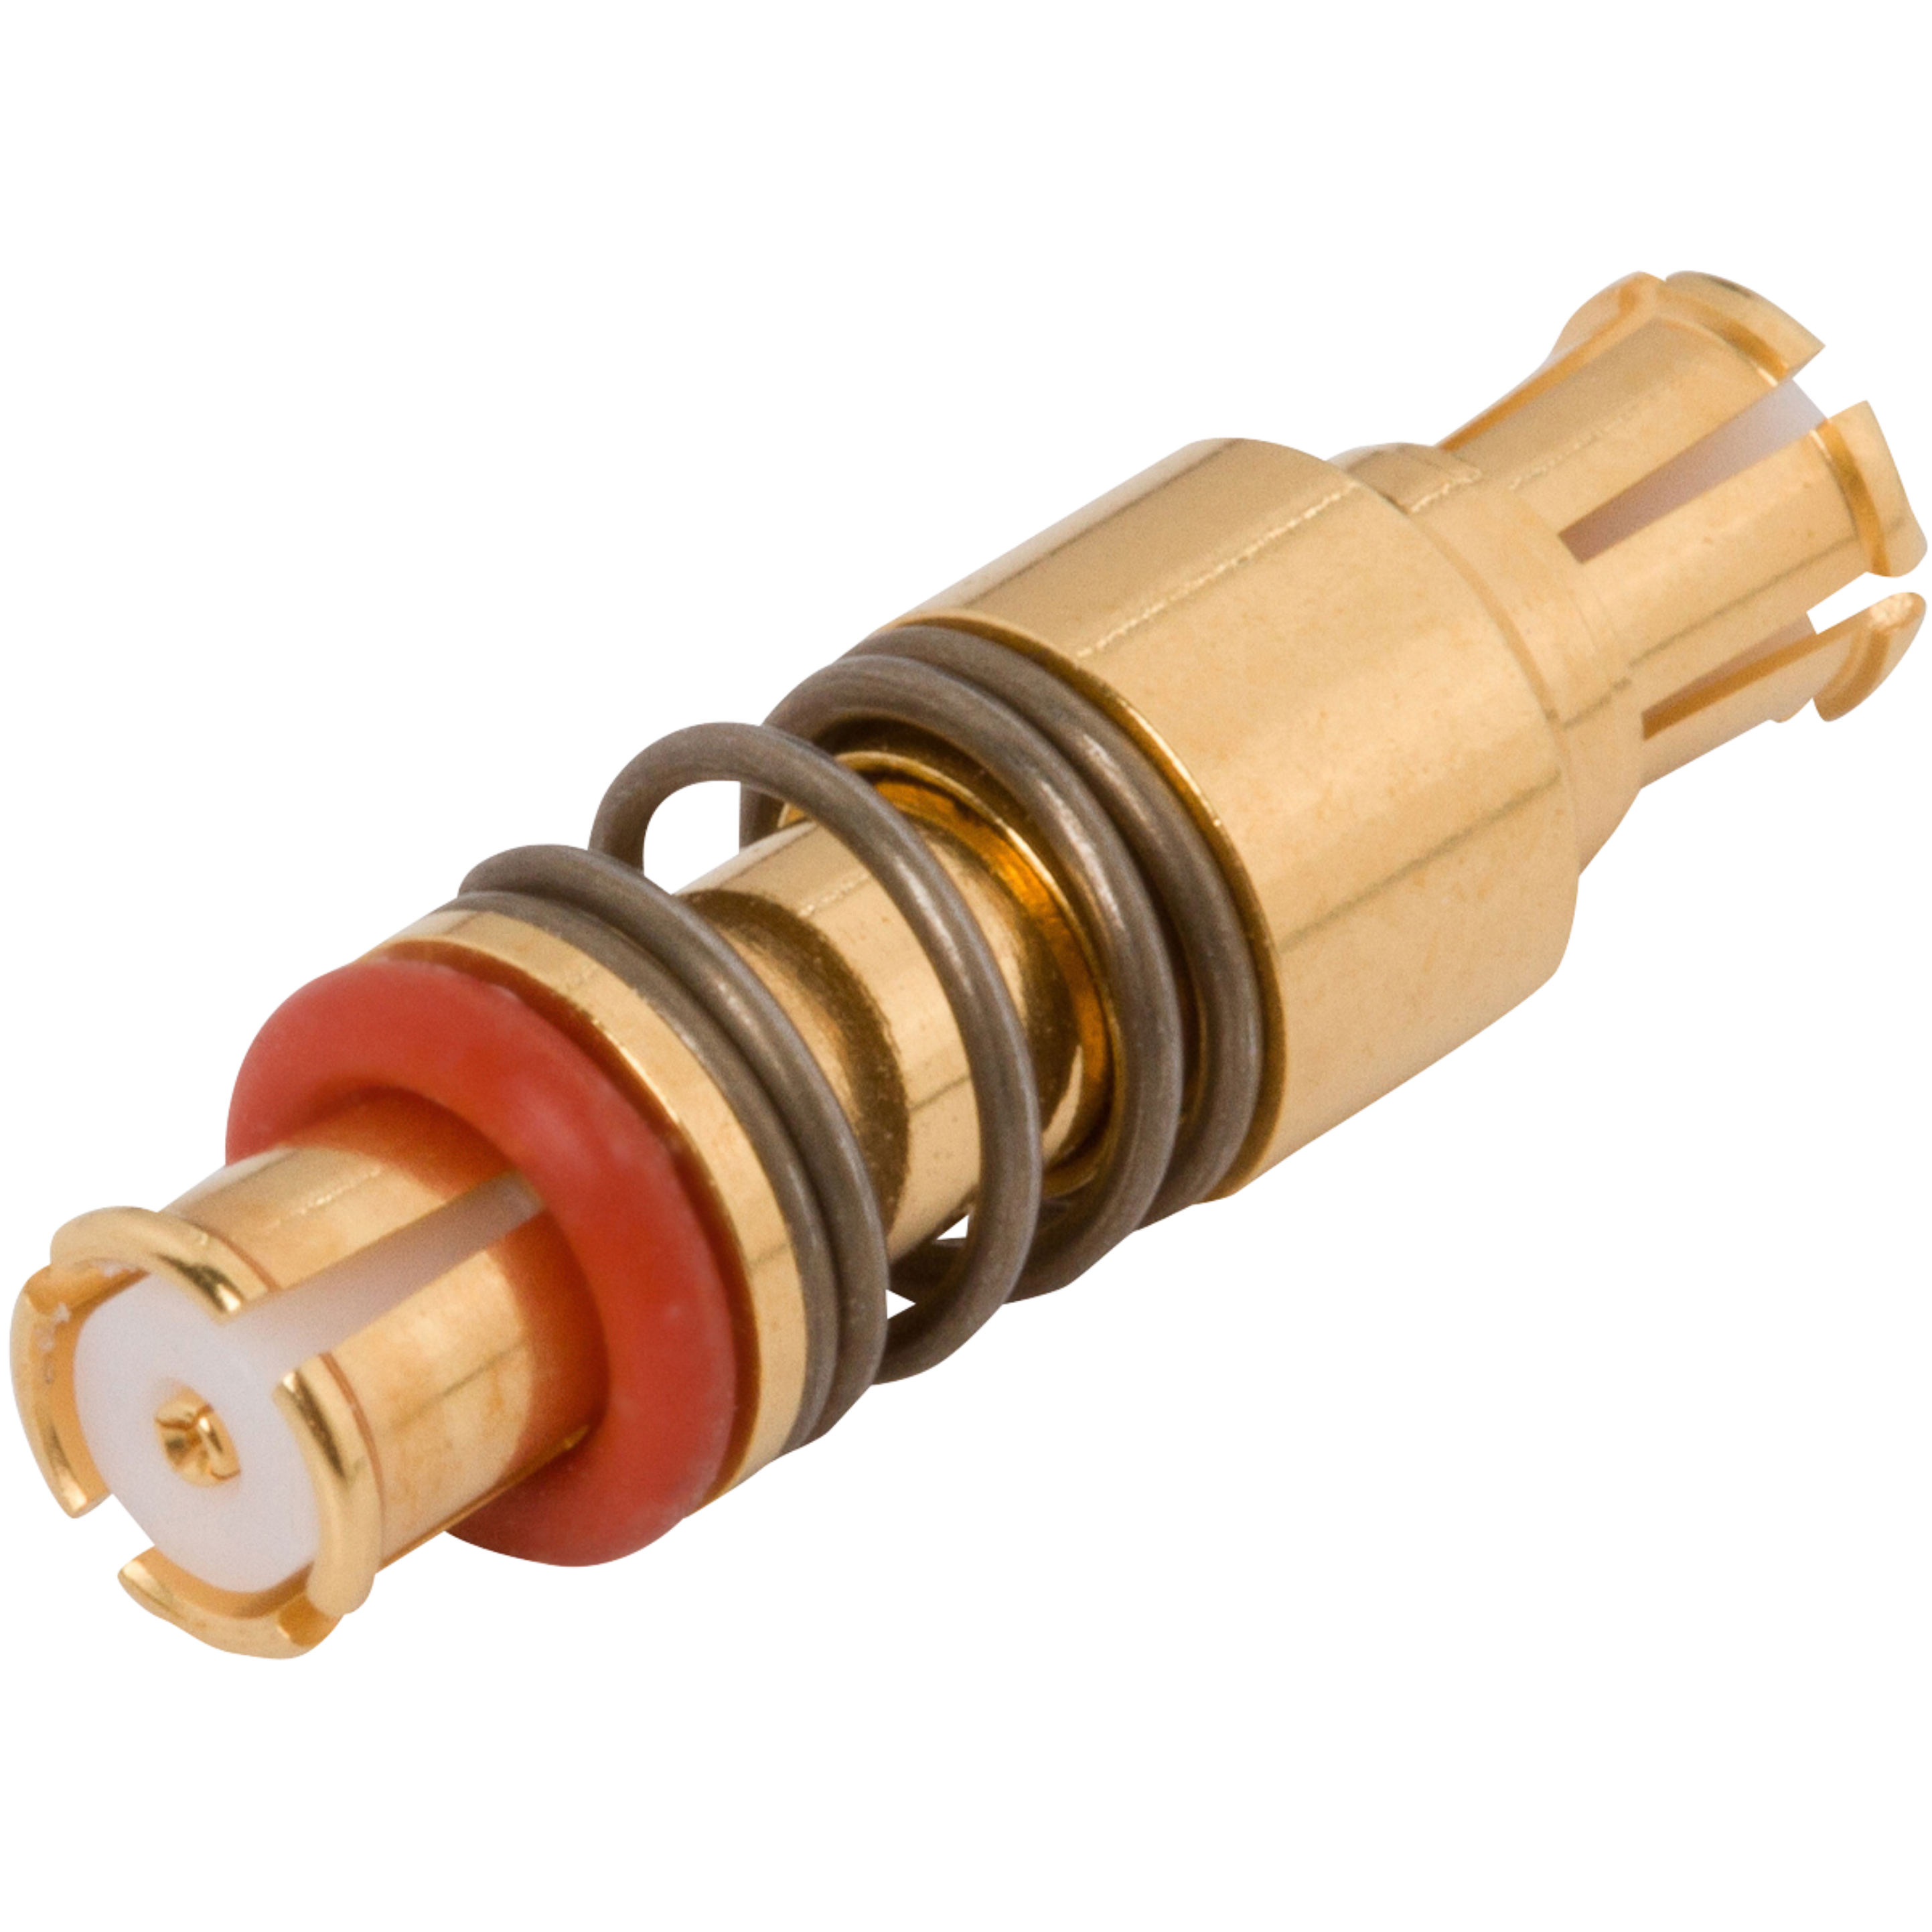 Picture of SMP Female to Female Adapter, Spring Loaded (OAL 0.534")"